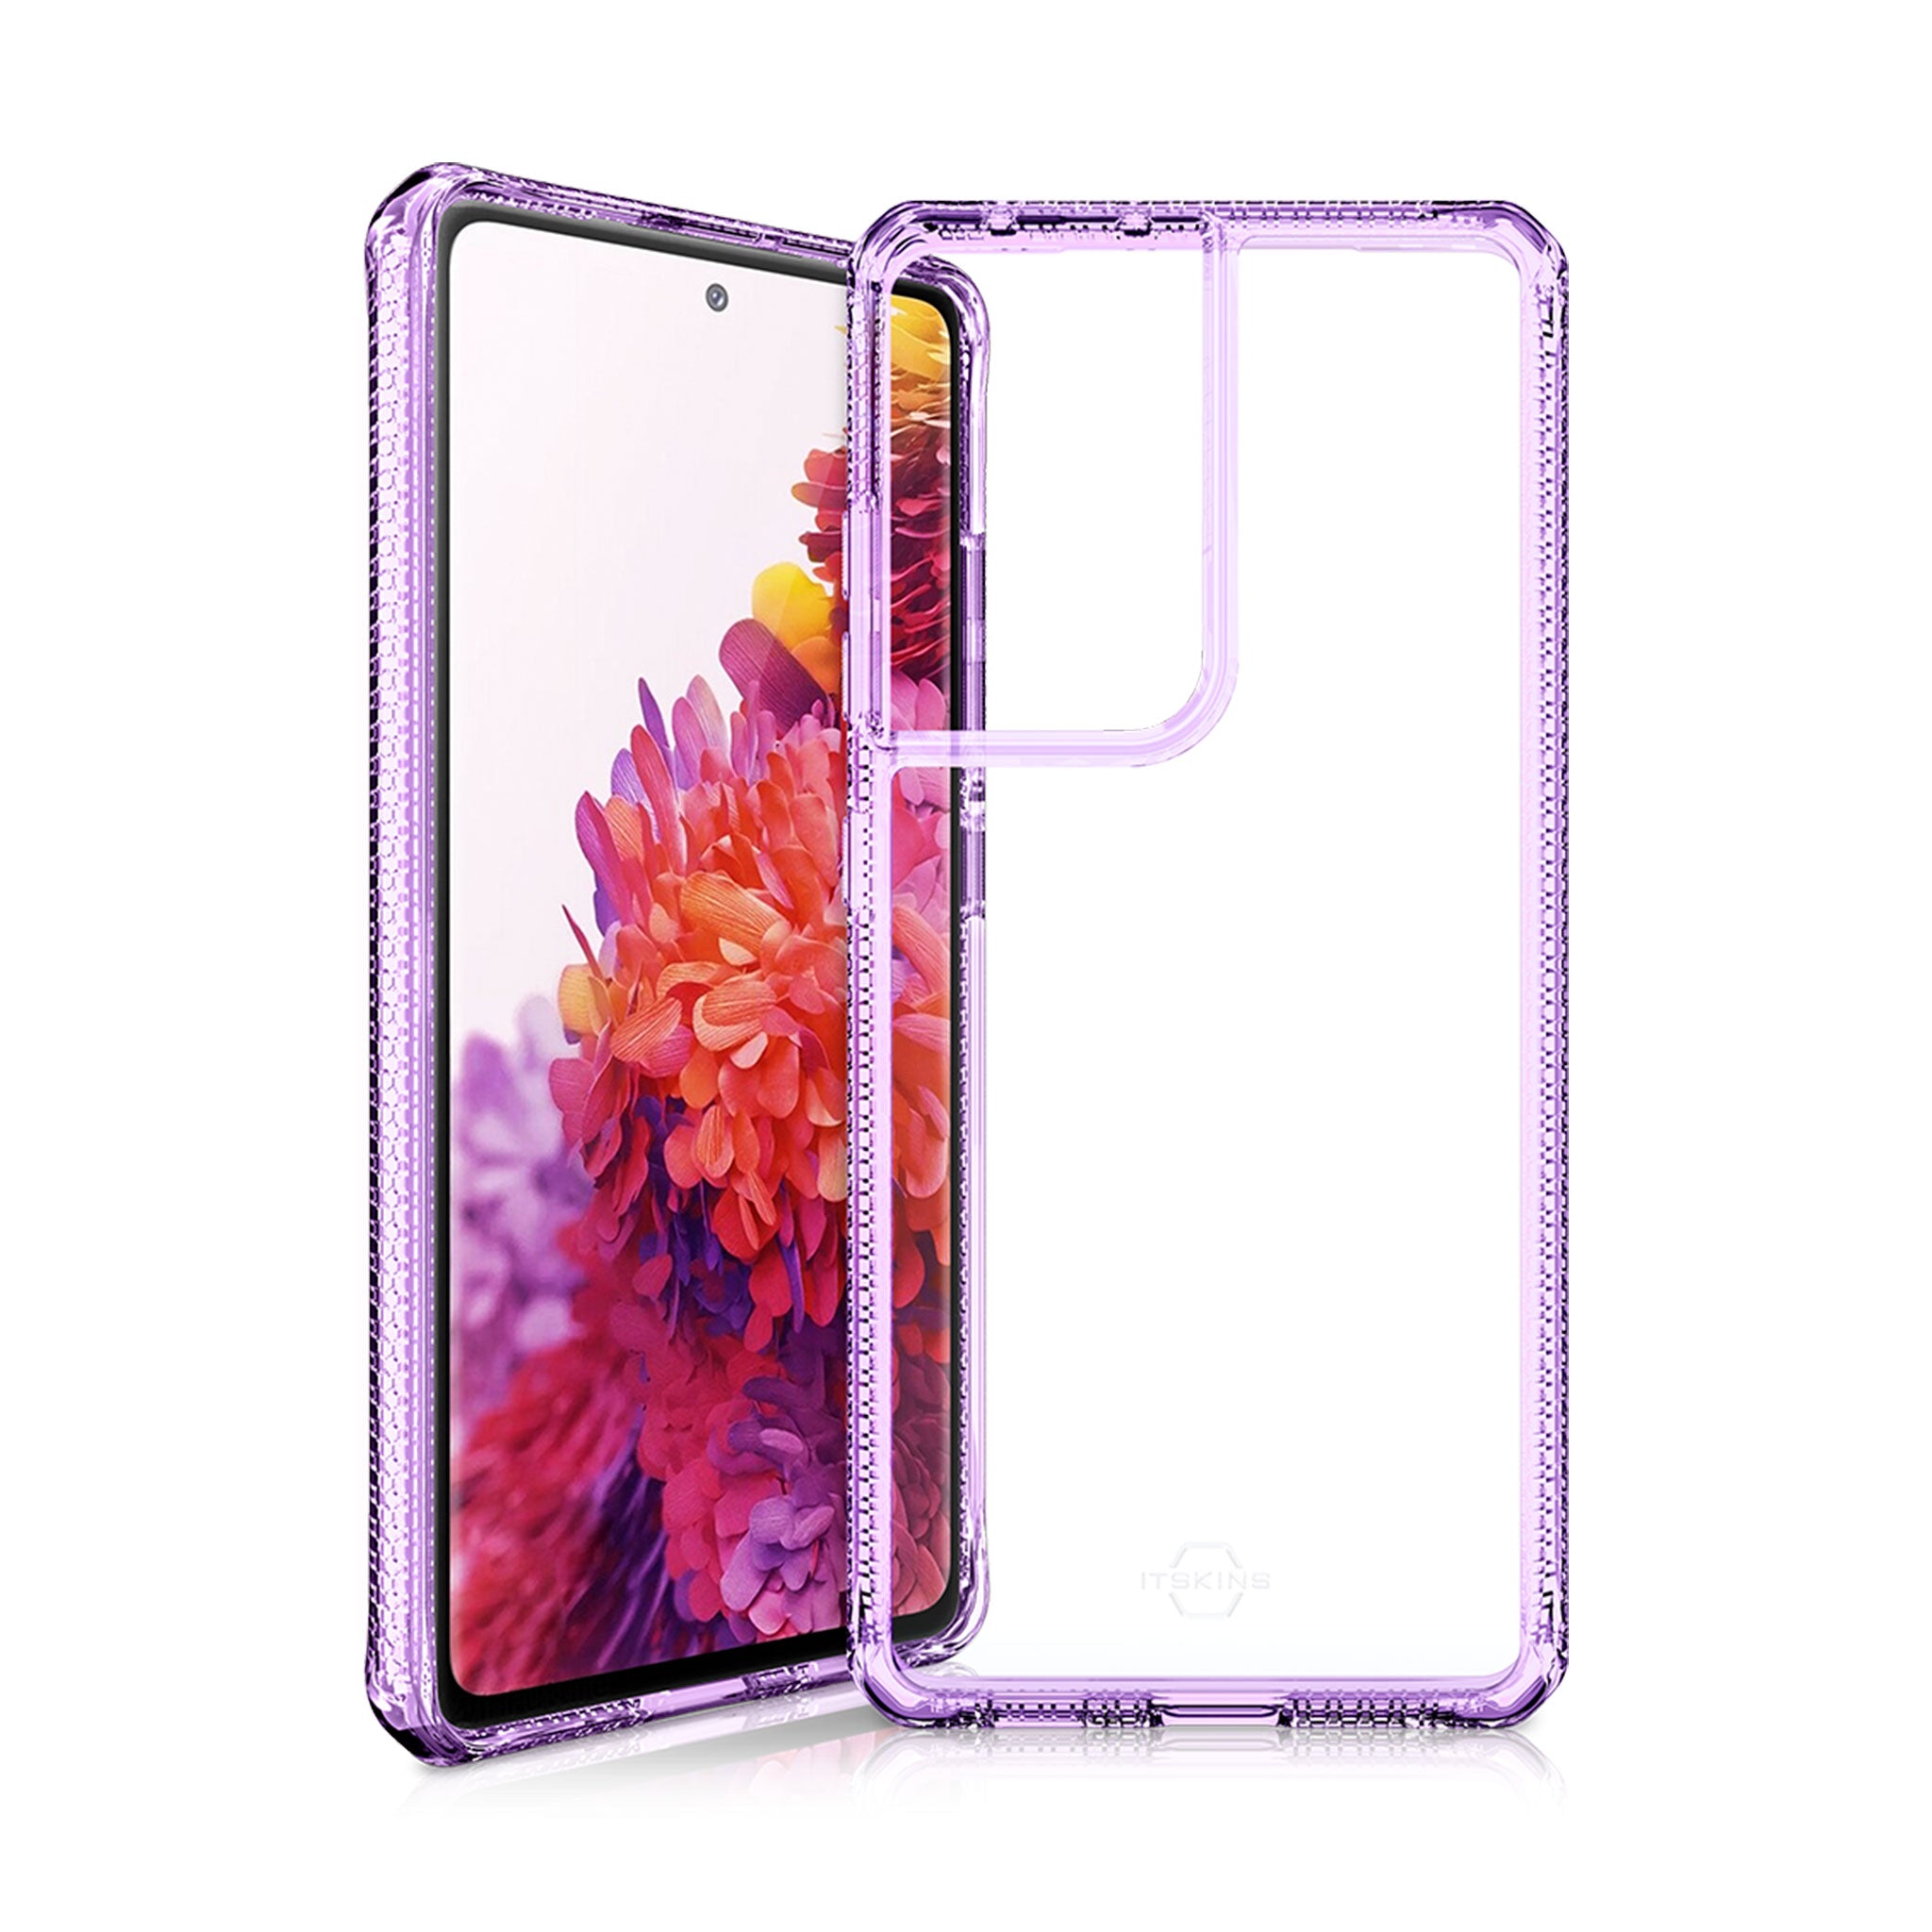 Itskins - Hybrid Clear Case For Samsung Galaxy S21 Ultra 5g - Violet And Transparent